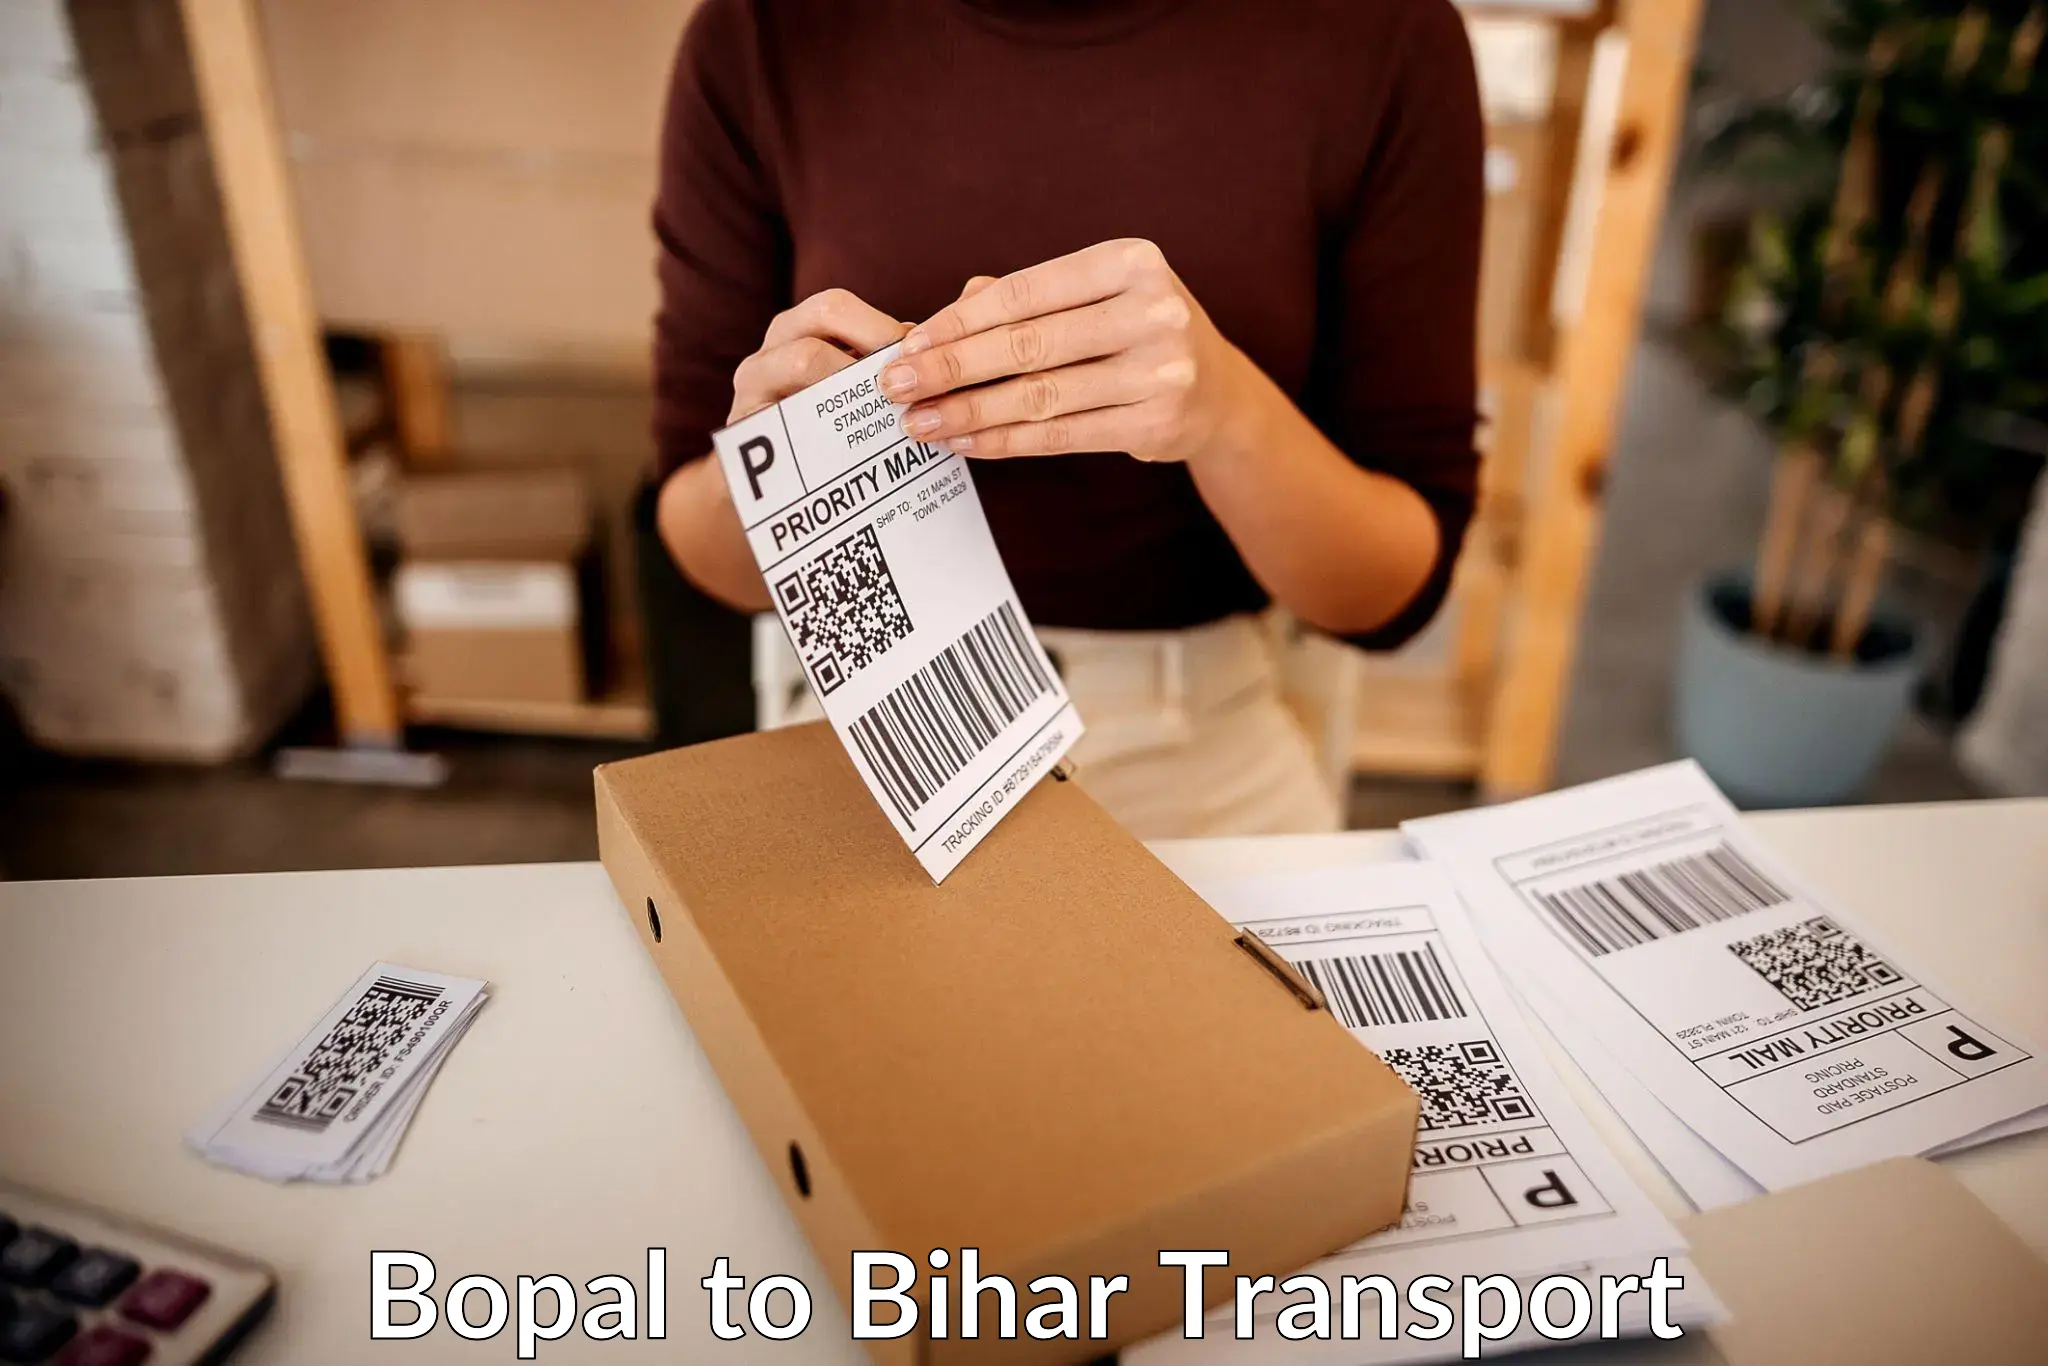 All India transport service Bopal to Kudra